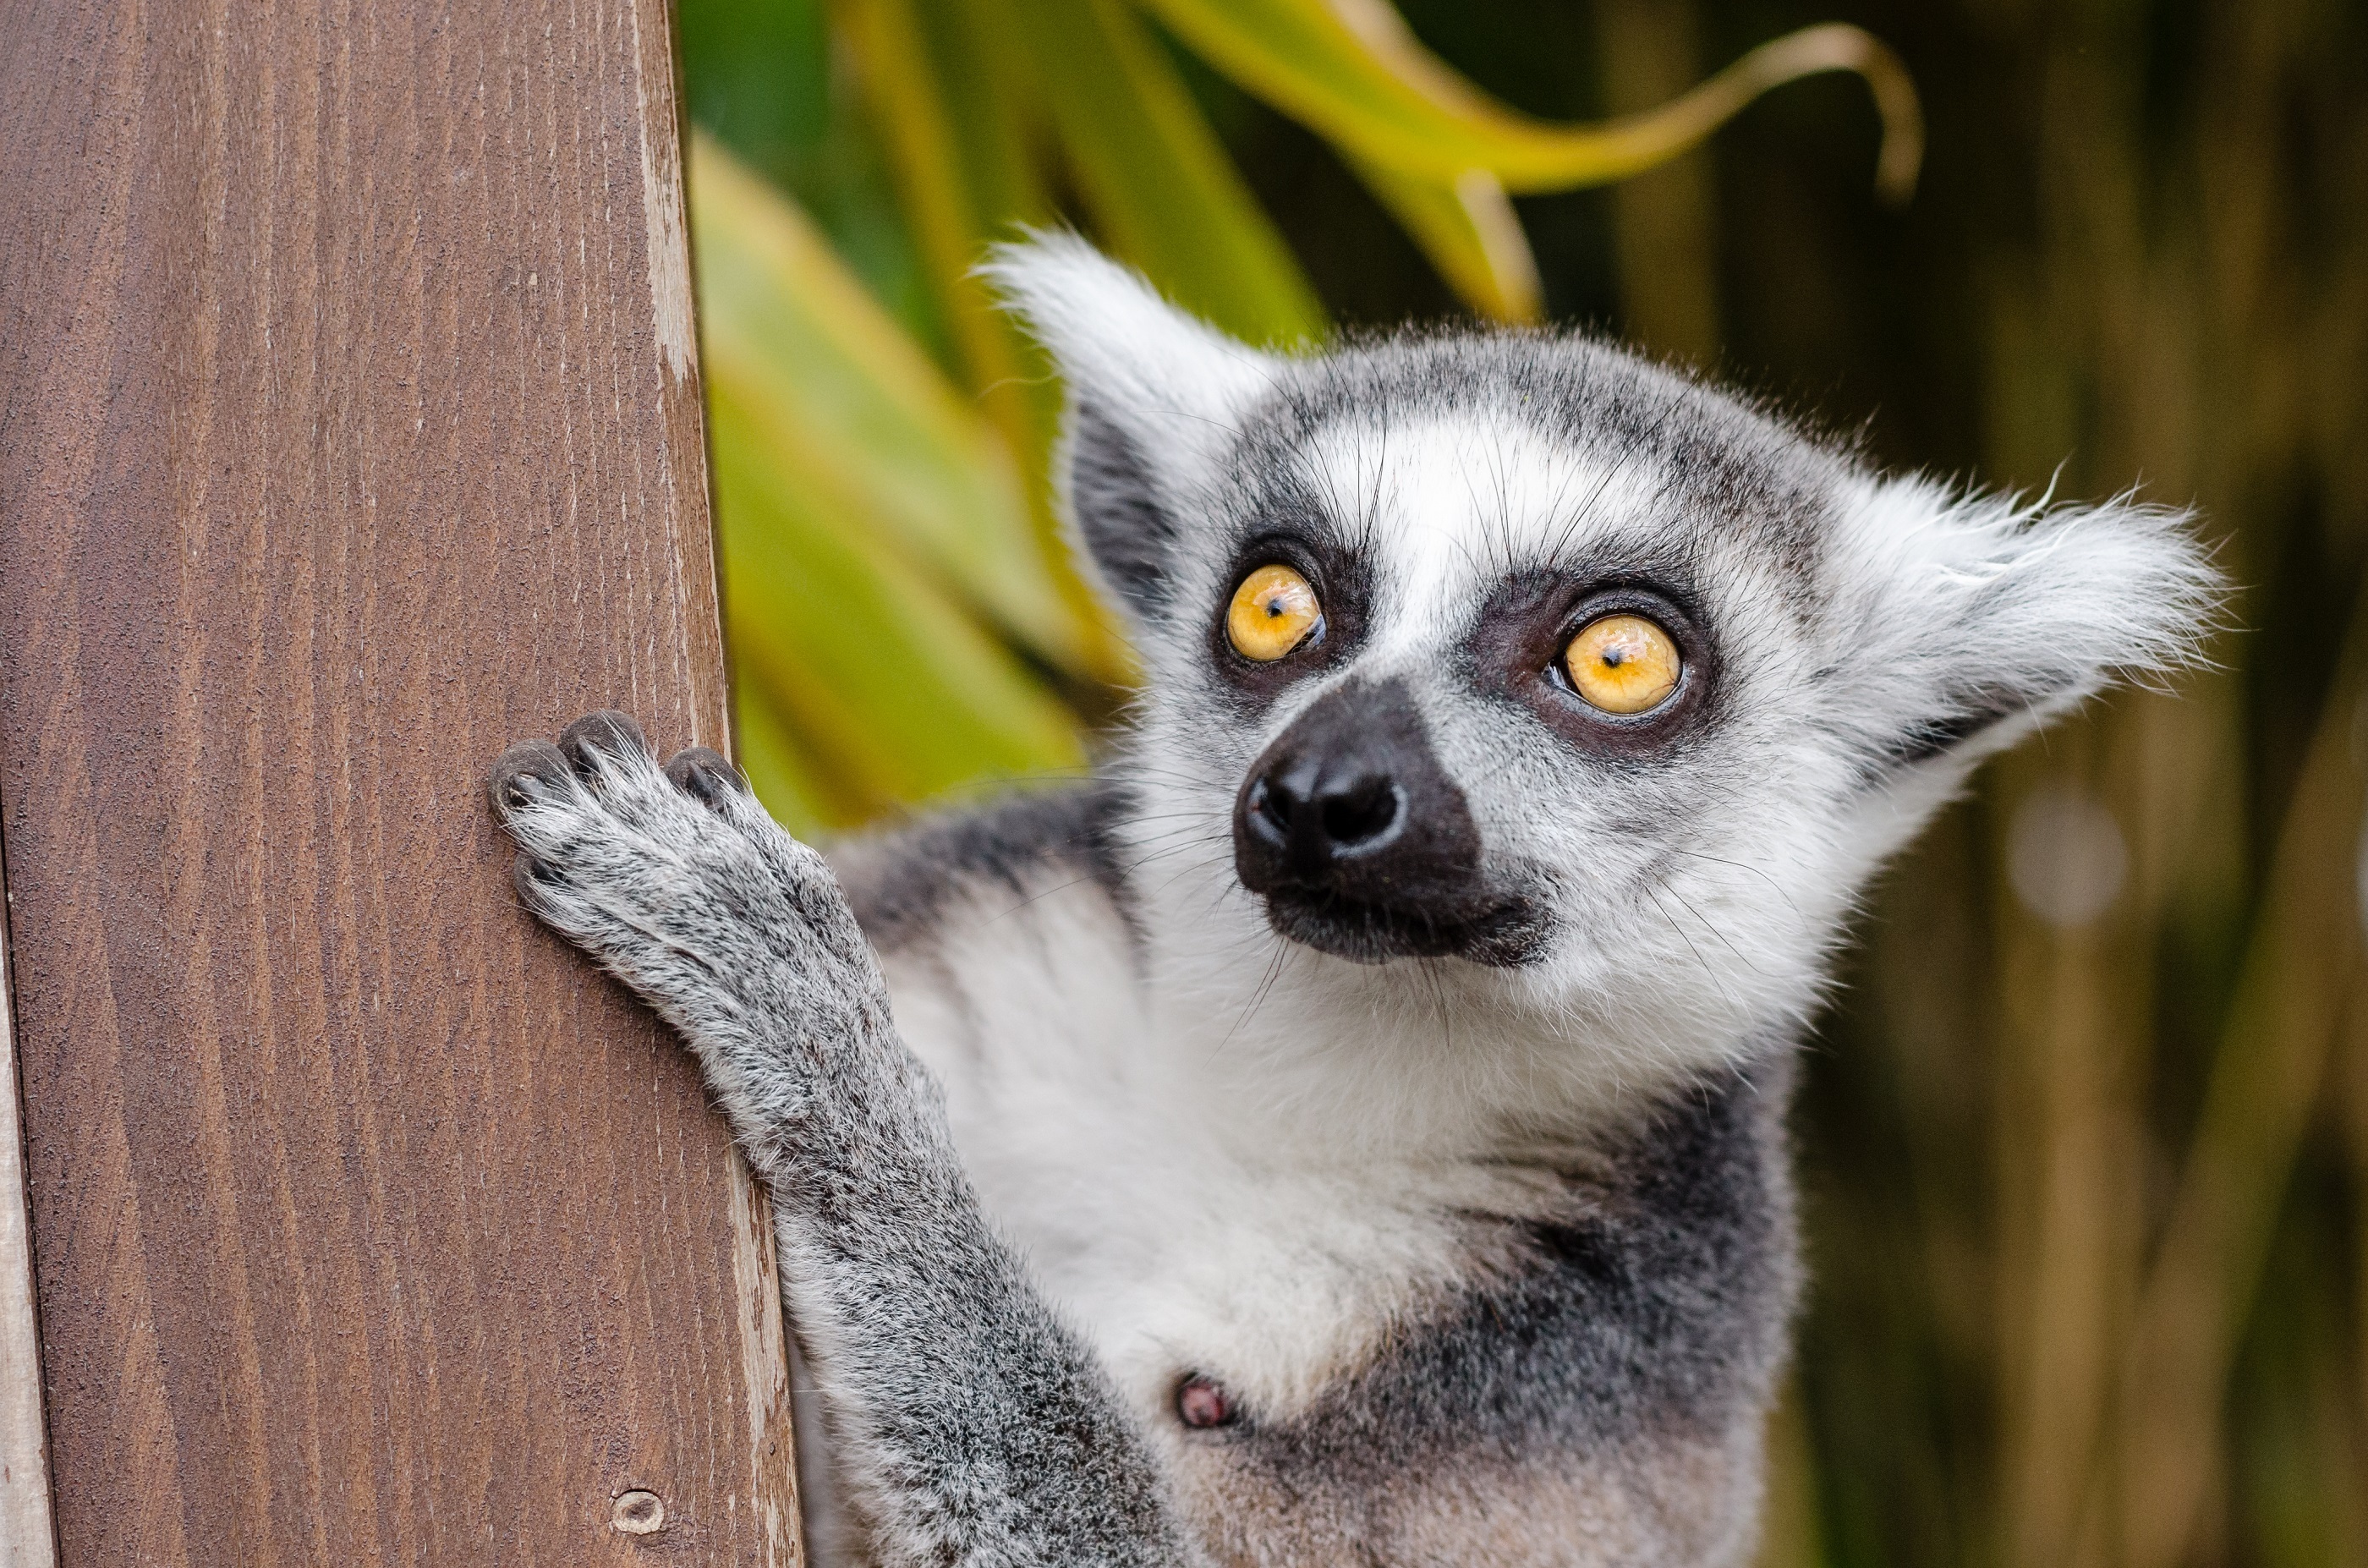 The look of a ring-tailed lemur with yellow eyes